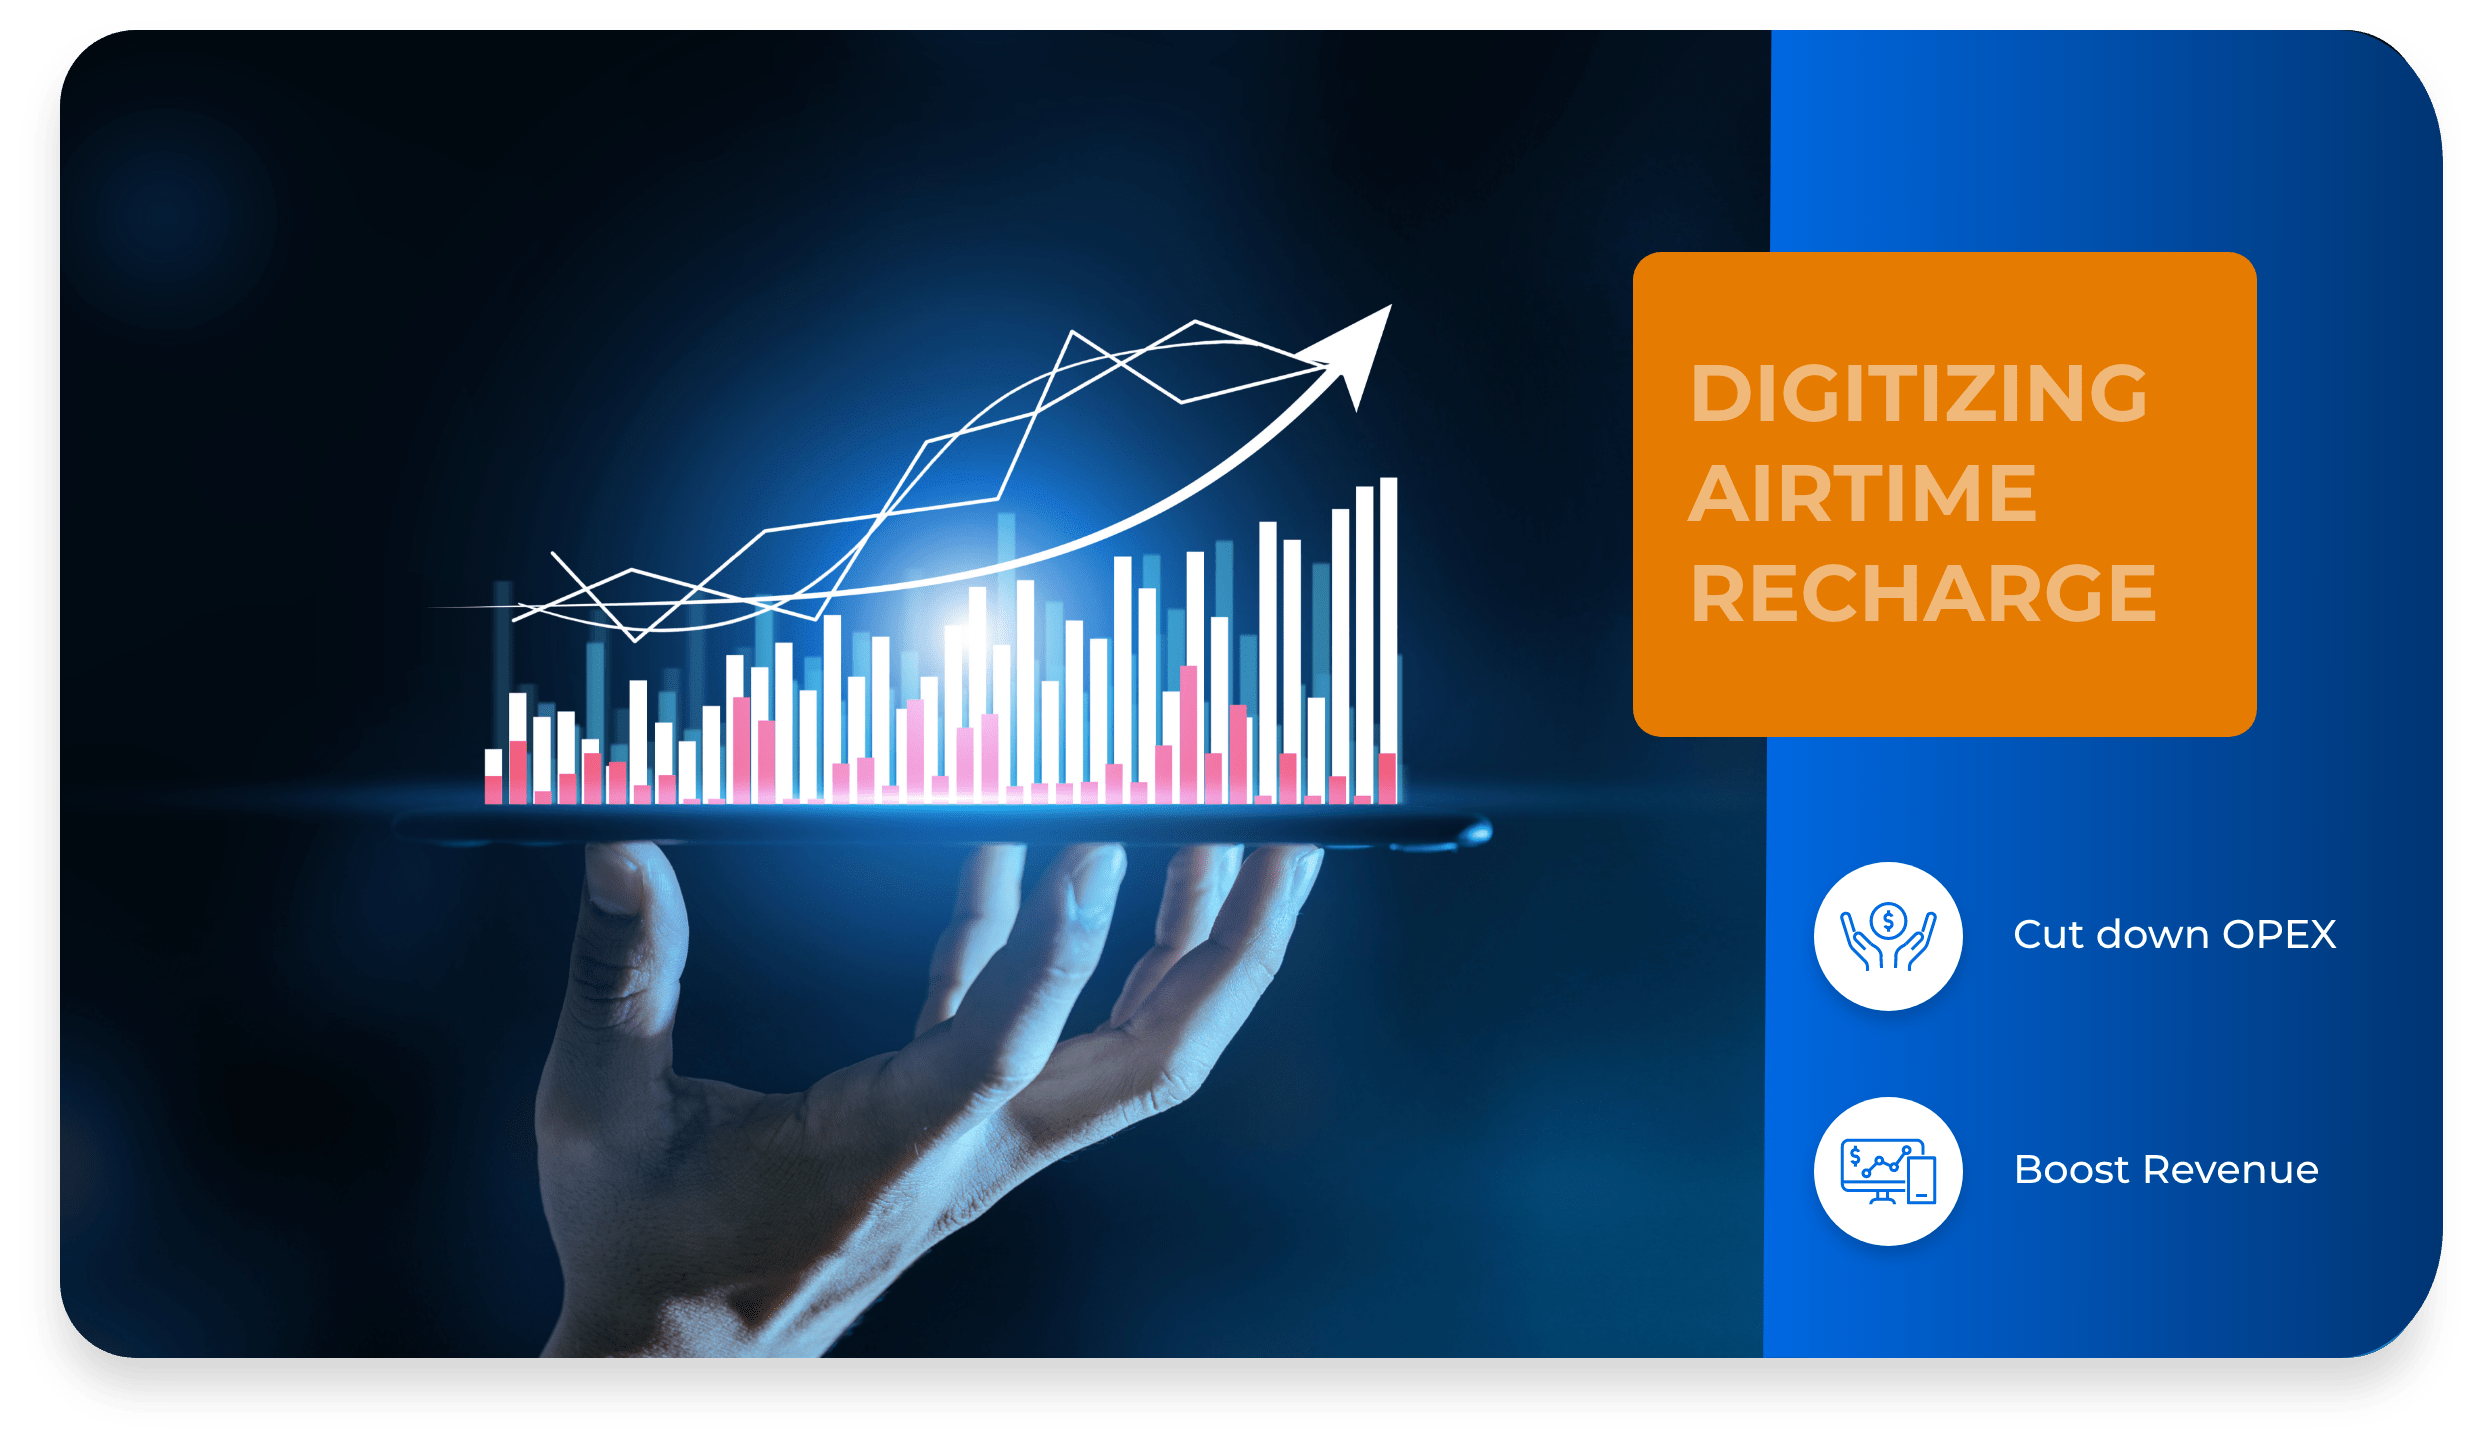 Digitization Airtime Recharge